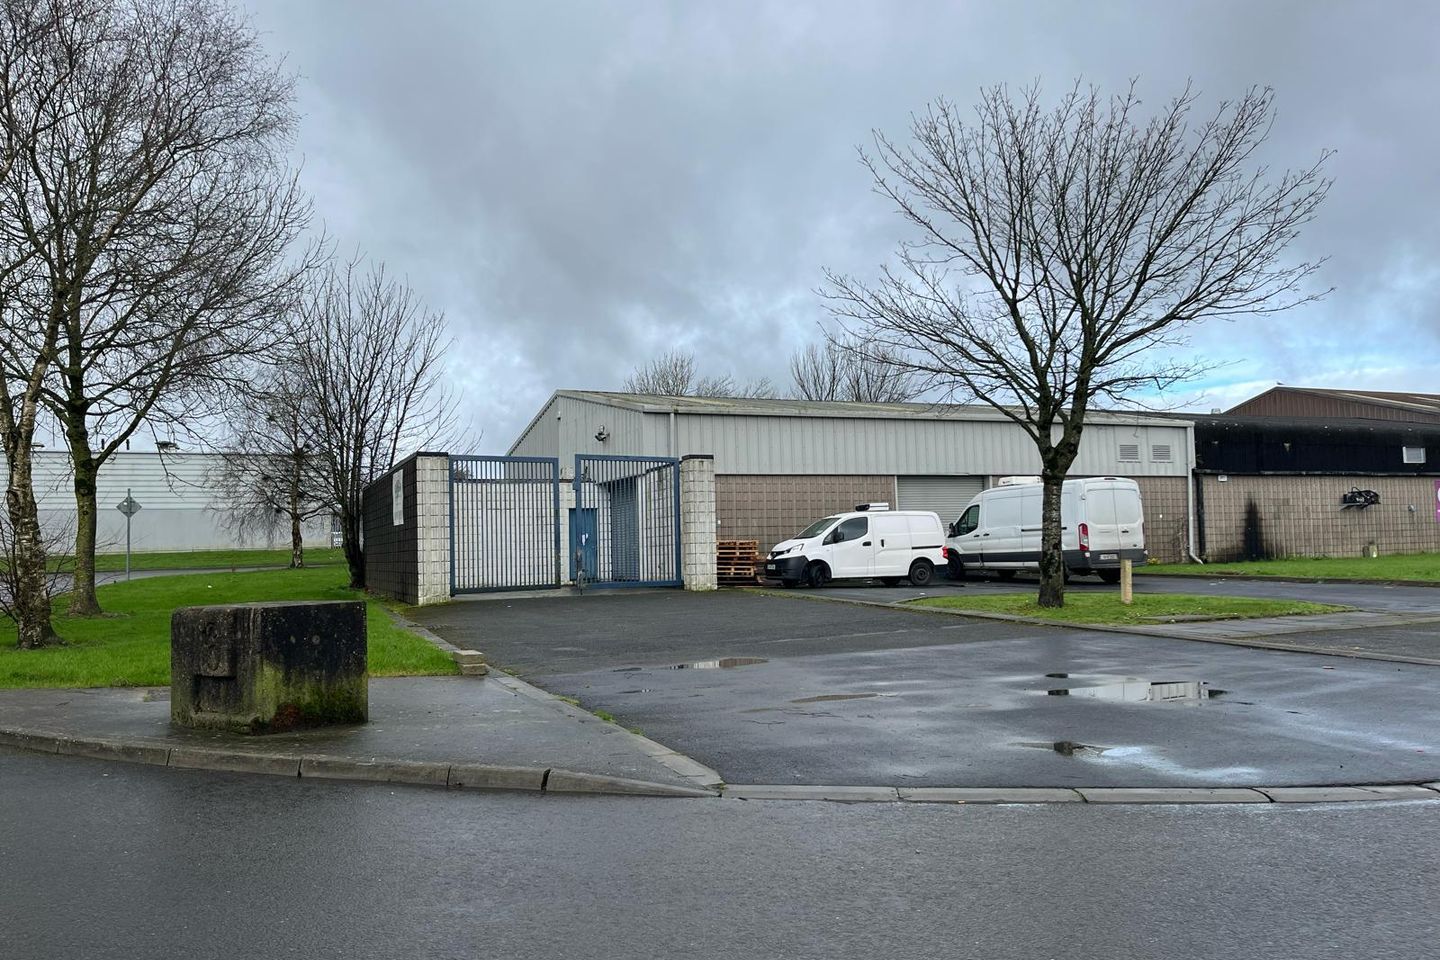 Unit 603 Northern Extension Waterford Industrial Estate, Waterford City, Co. Waterford